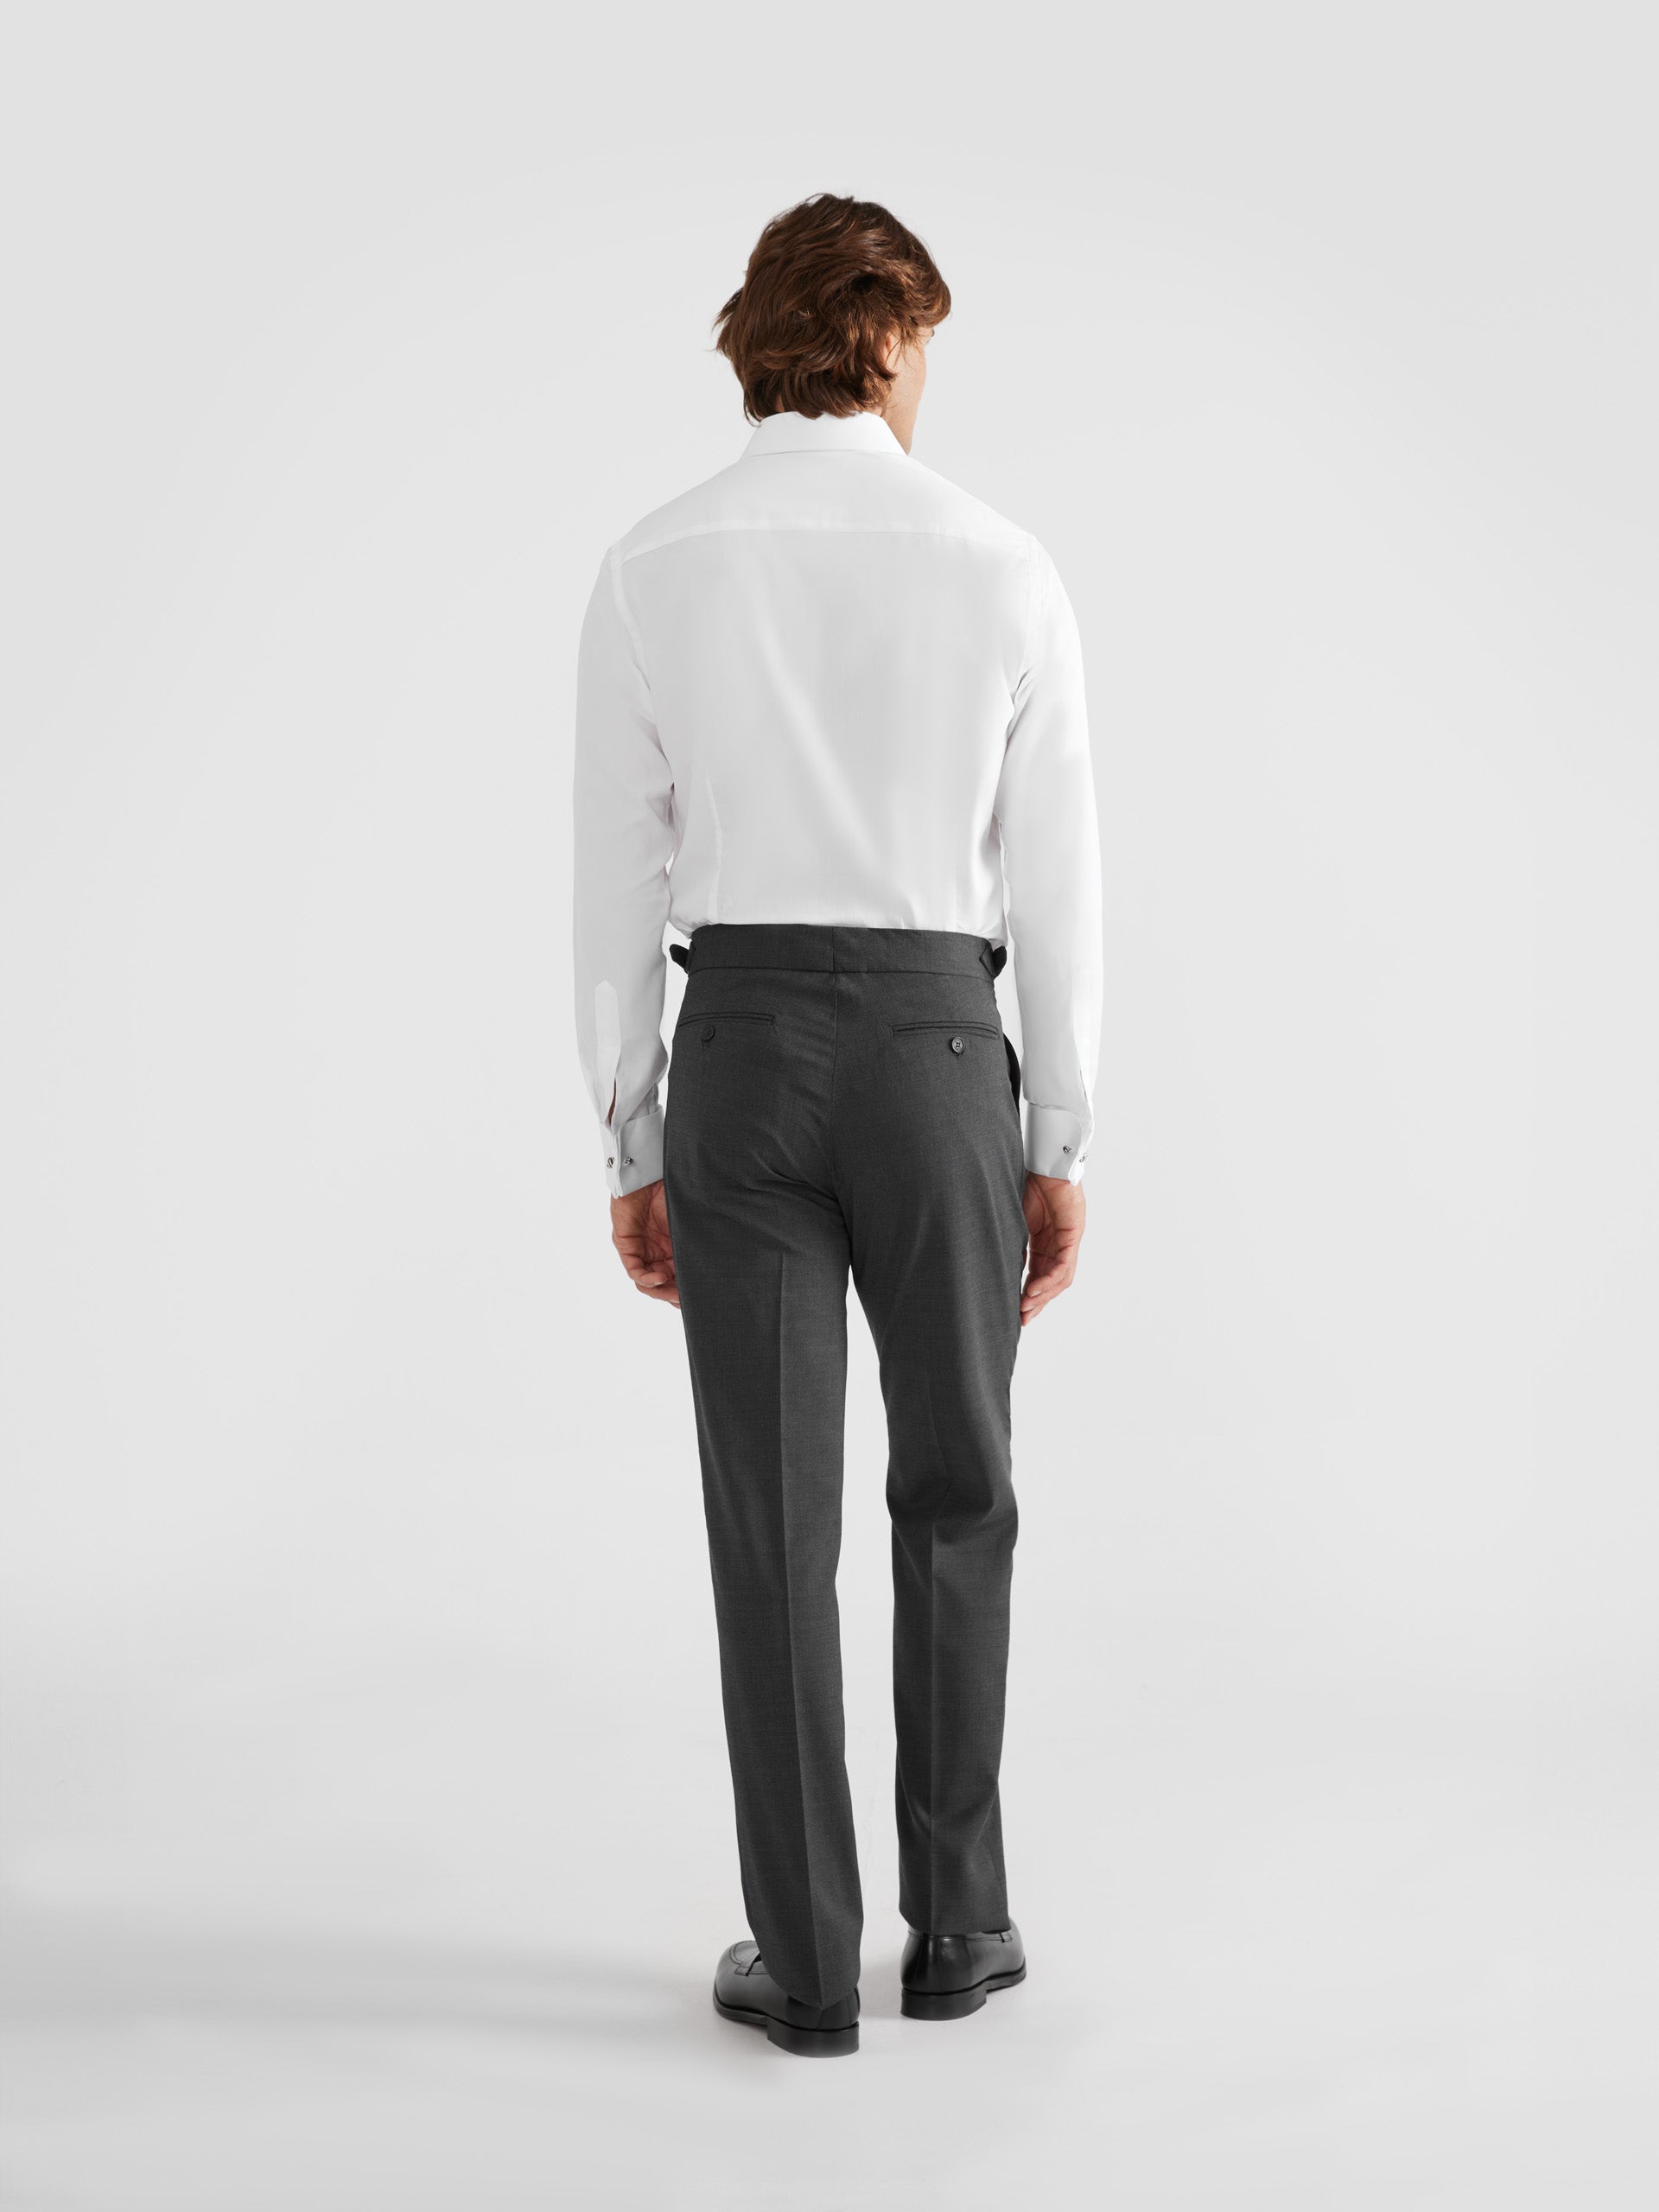 Charcoal gray extended dress pants